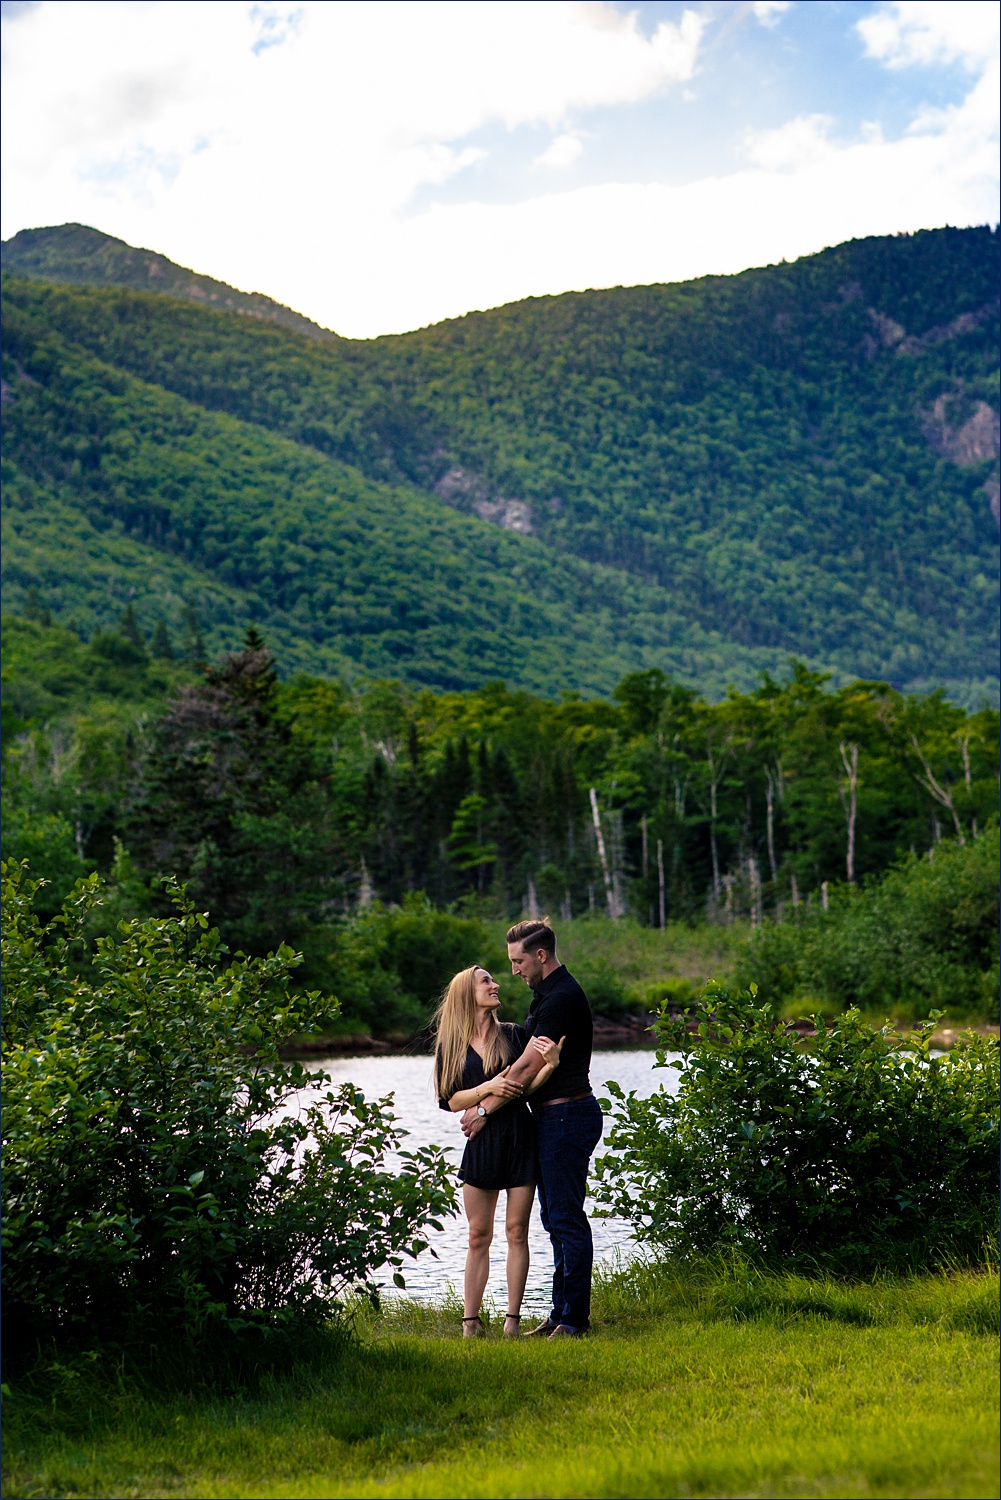 WIth the White Mountains of NH behind them, the couple embraces at their engagement session